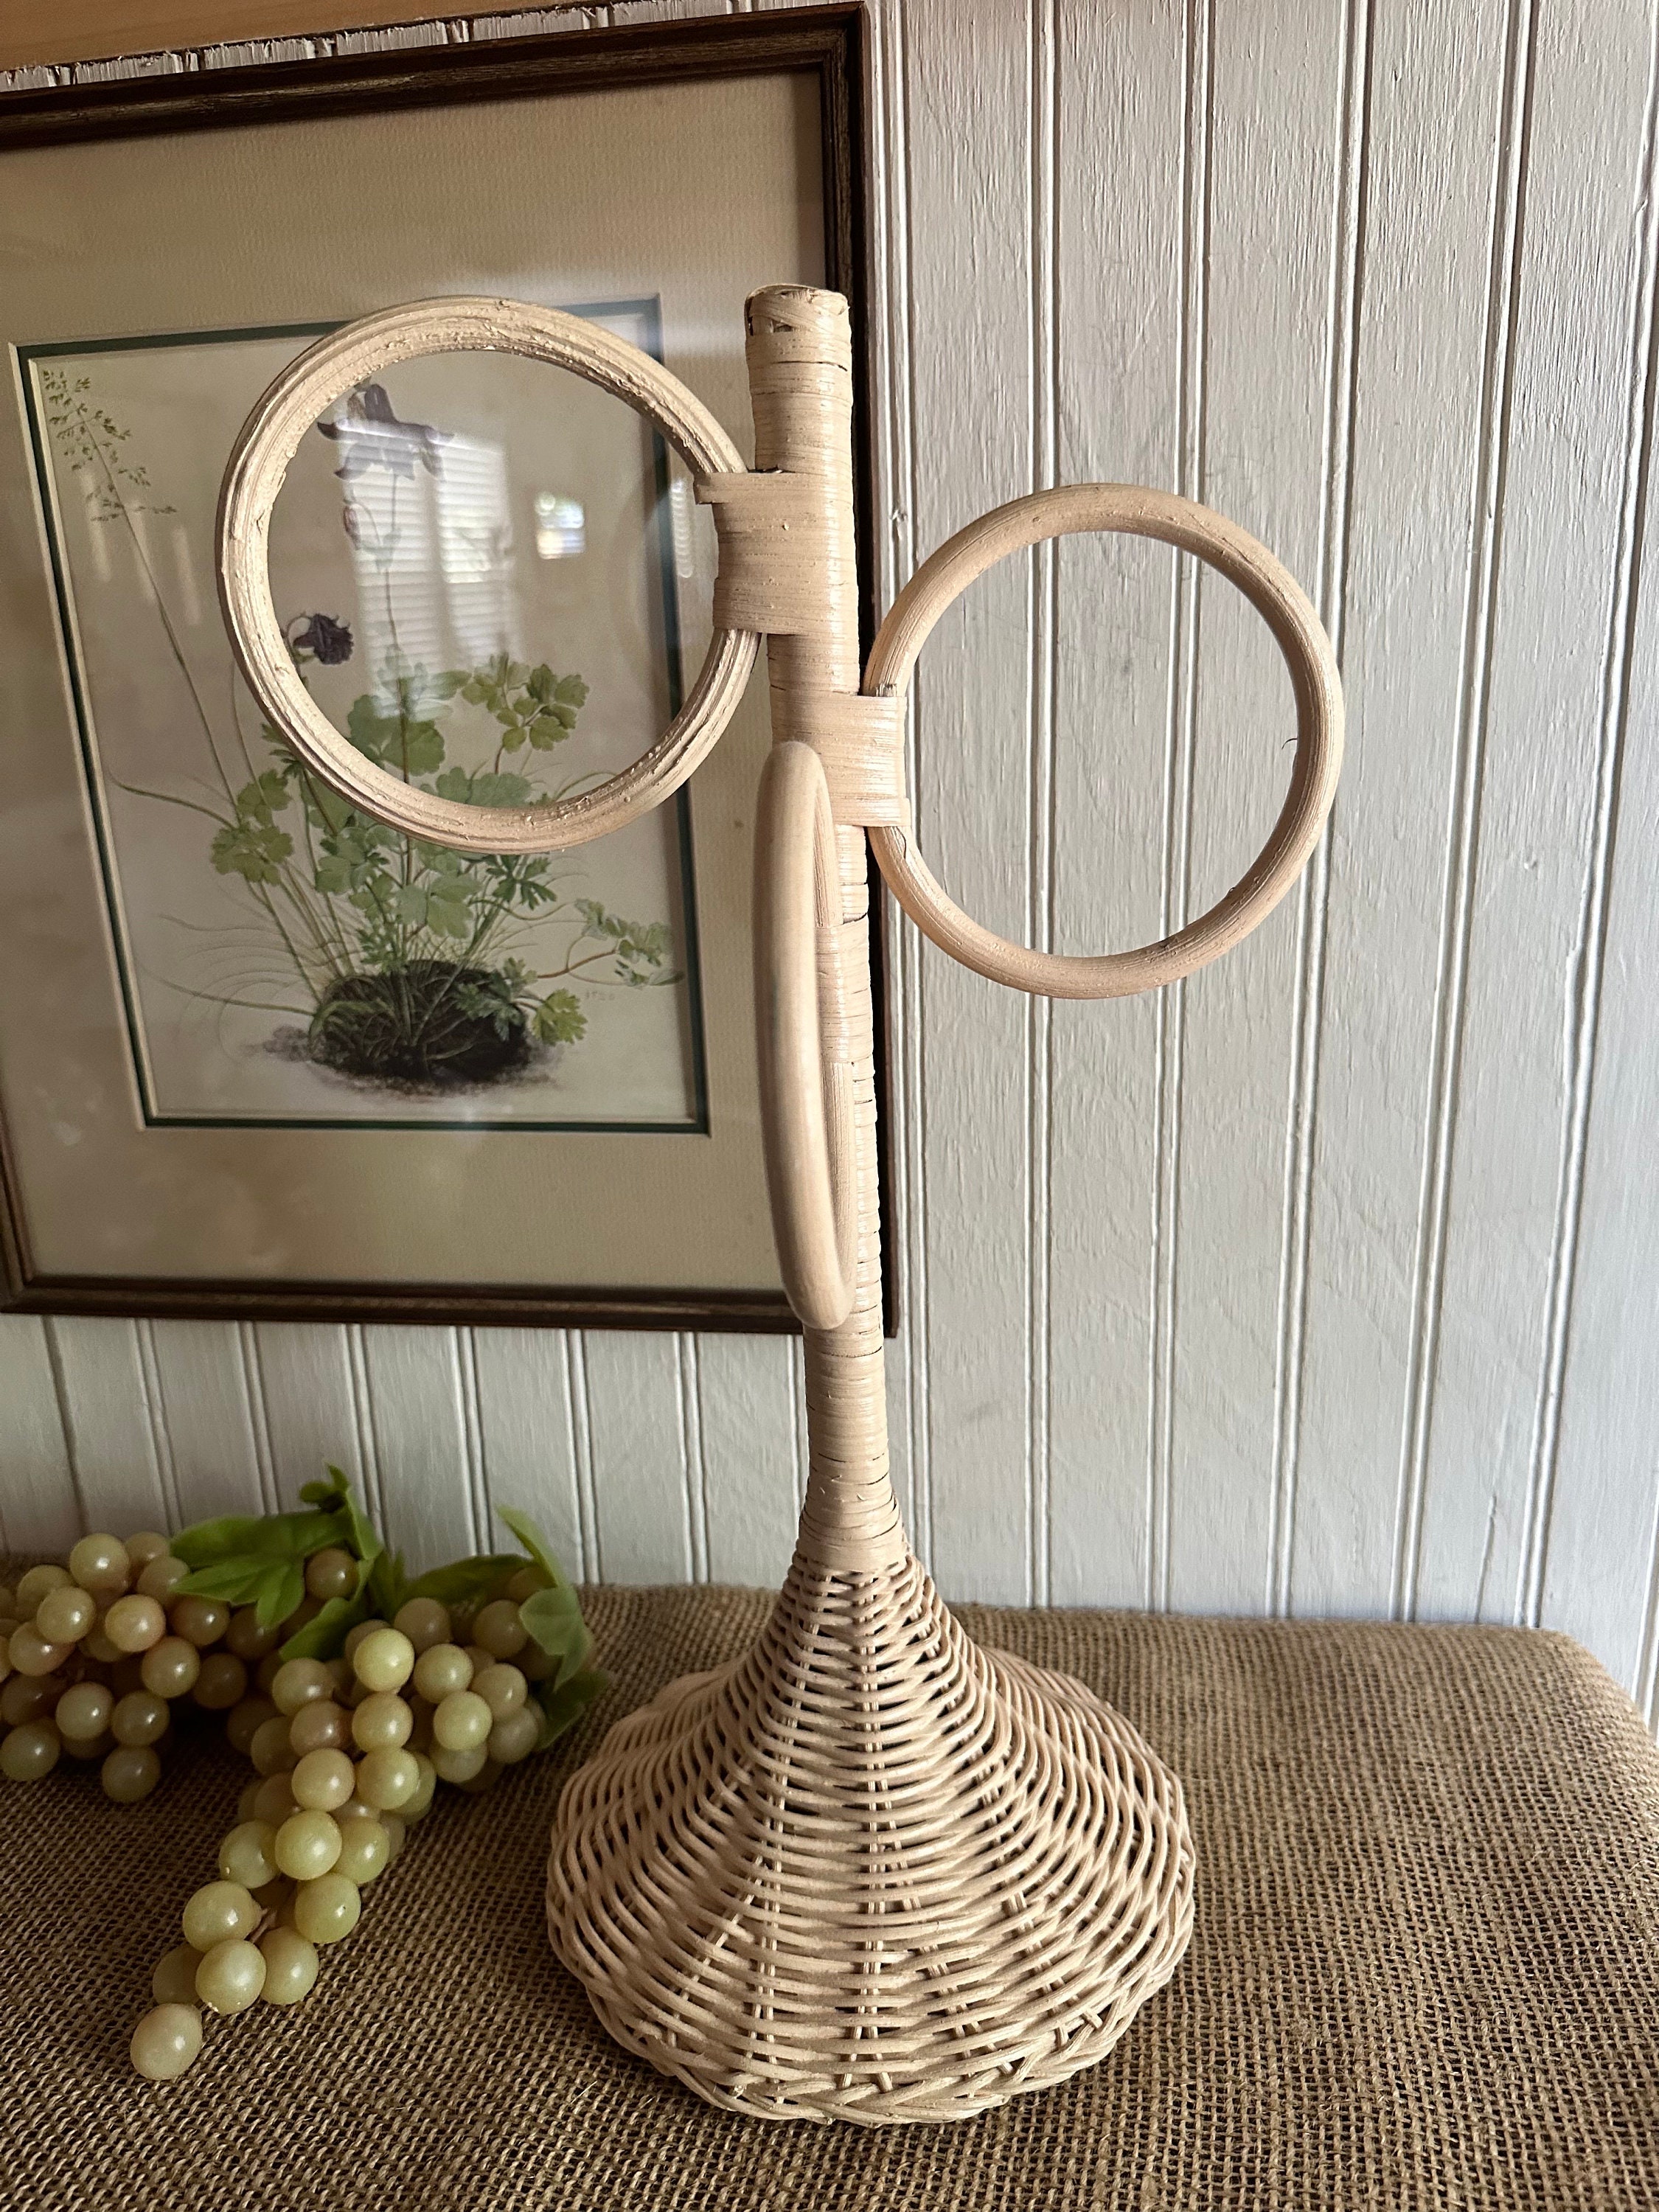 Wicker paper towel holder standing for rustic kitchen decor